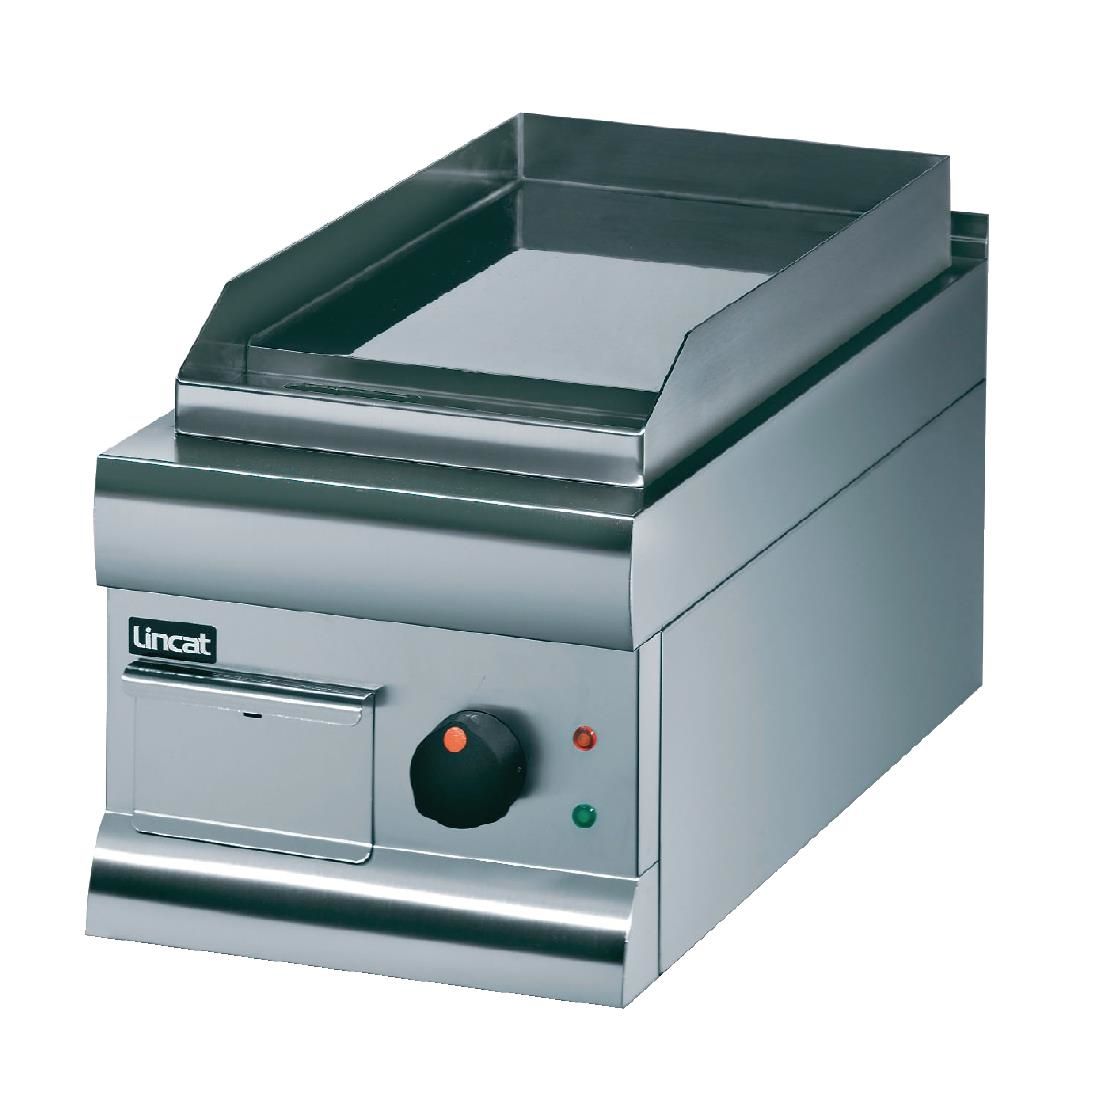 GS3/C - Lincat Silverlink 600 Electric Counter-top Griddle - Chrome Plate - W 300 mm - 2.0 kW F901 JD Catering Equipment Solutions Ltd